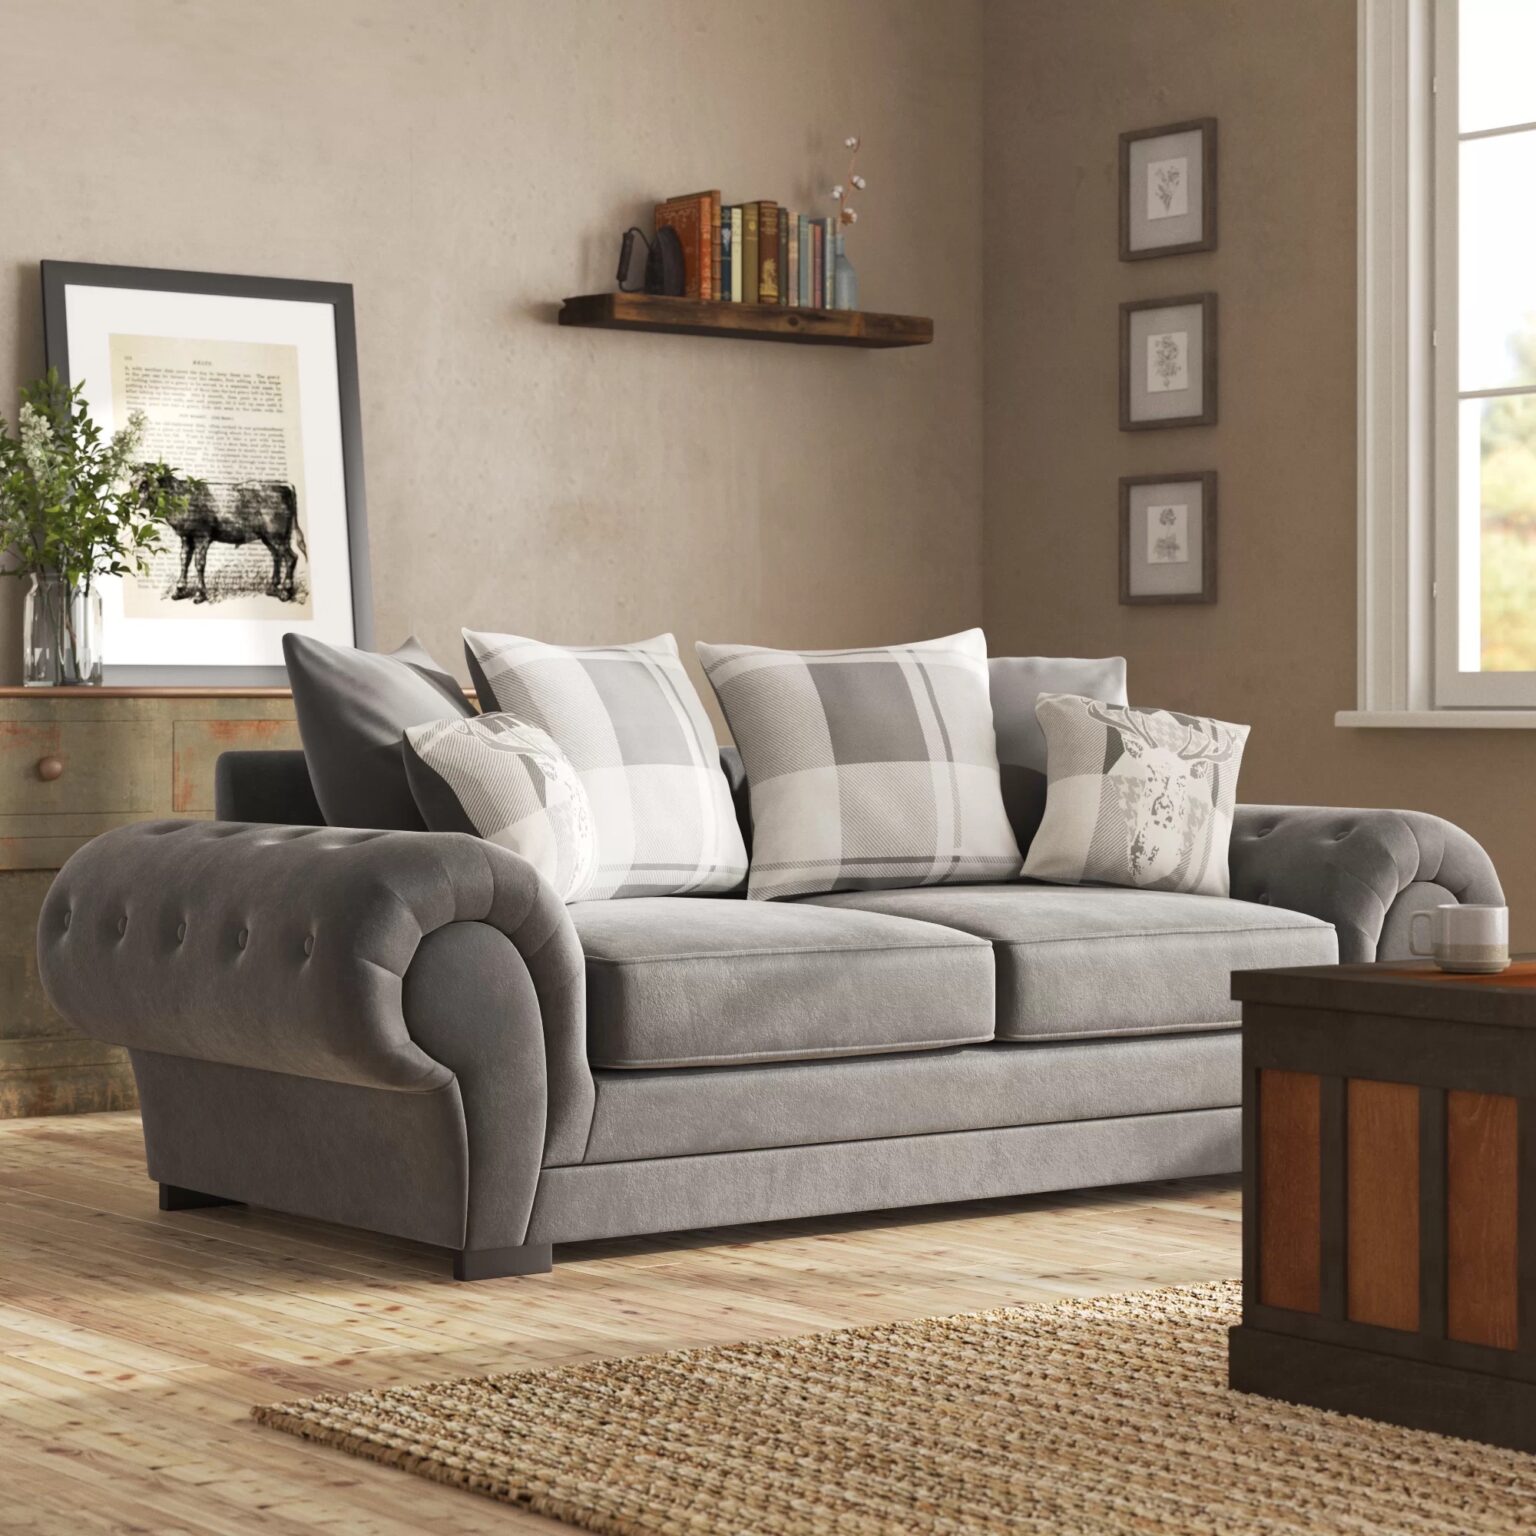 One of the essential pieces of furniture that you'll have in your home is your sofa. Here's our guide so you can choose the right sofa design.